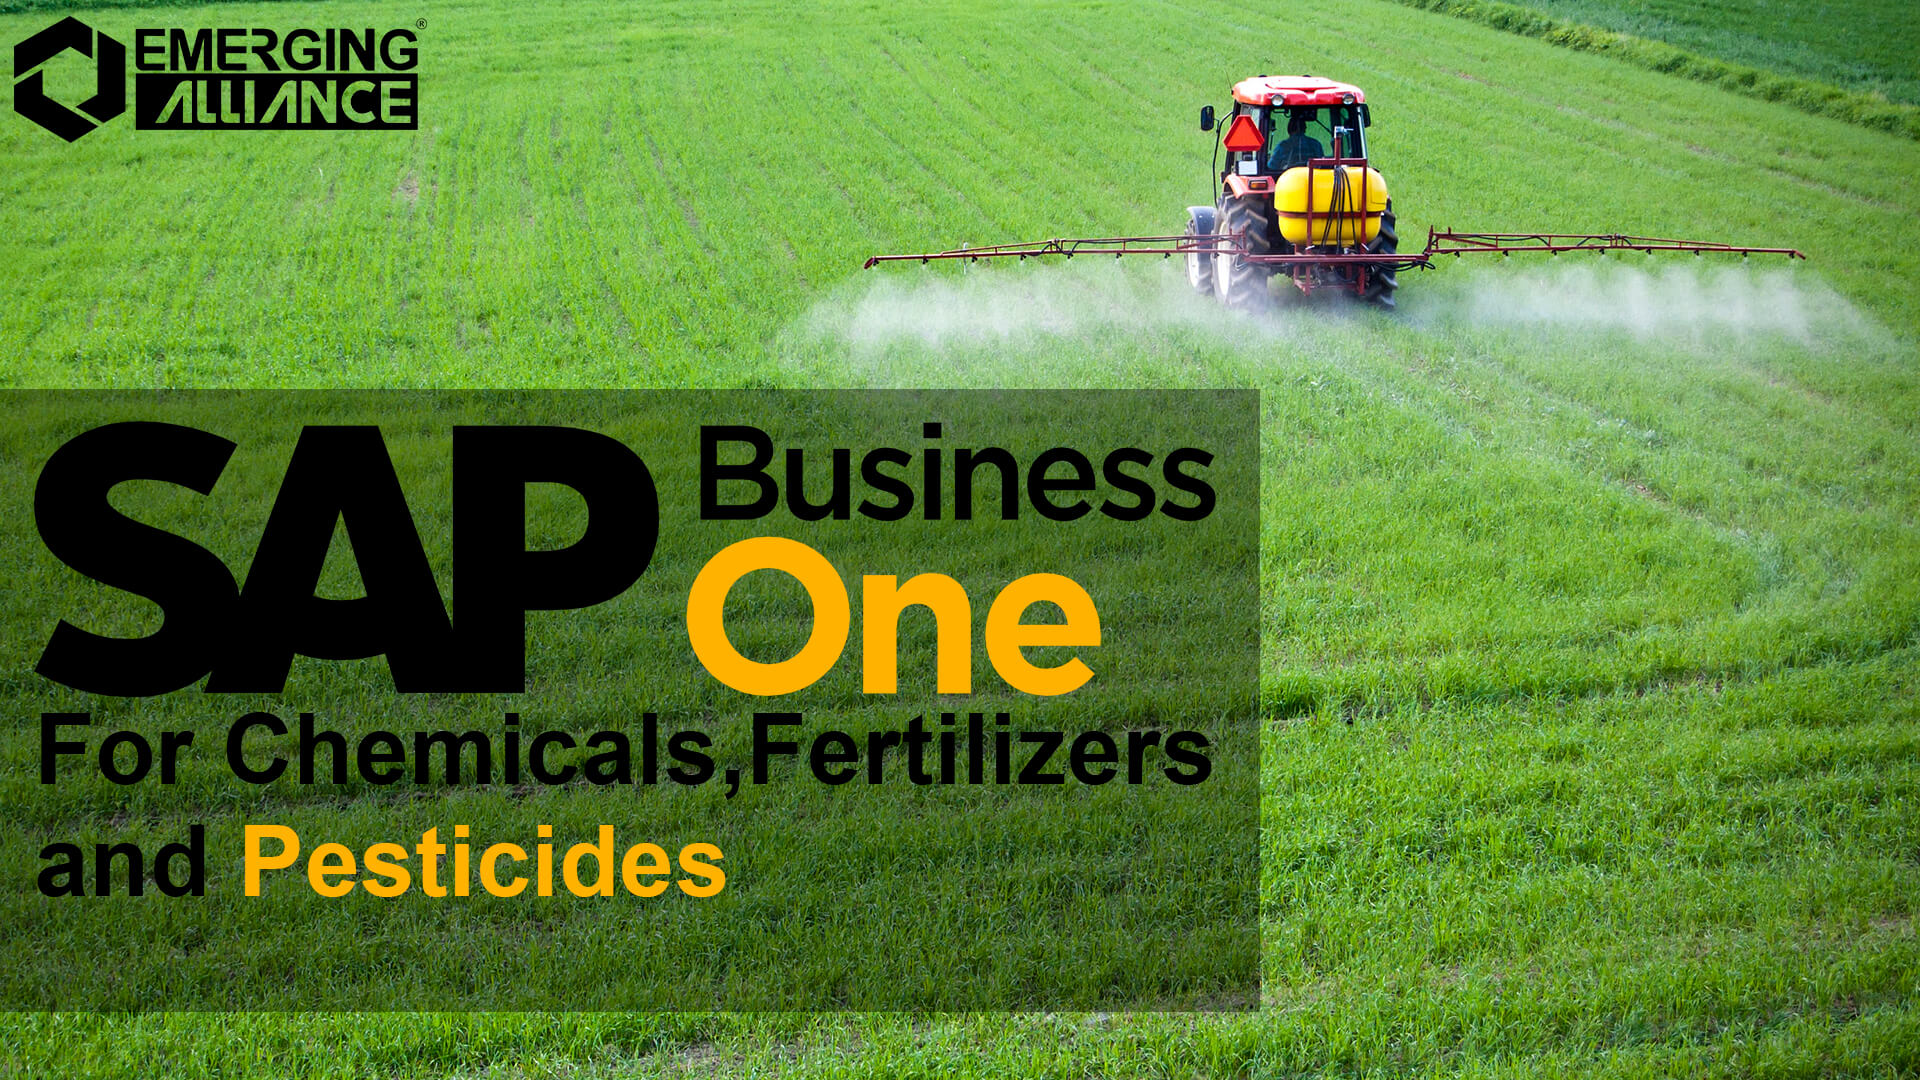 sap business one for chemicals, fertilizers and pesticides